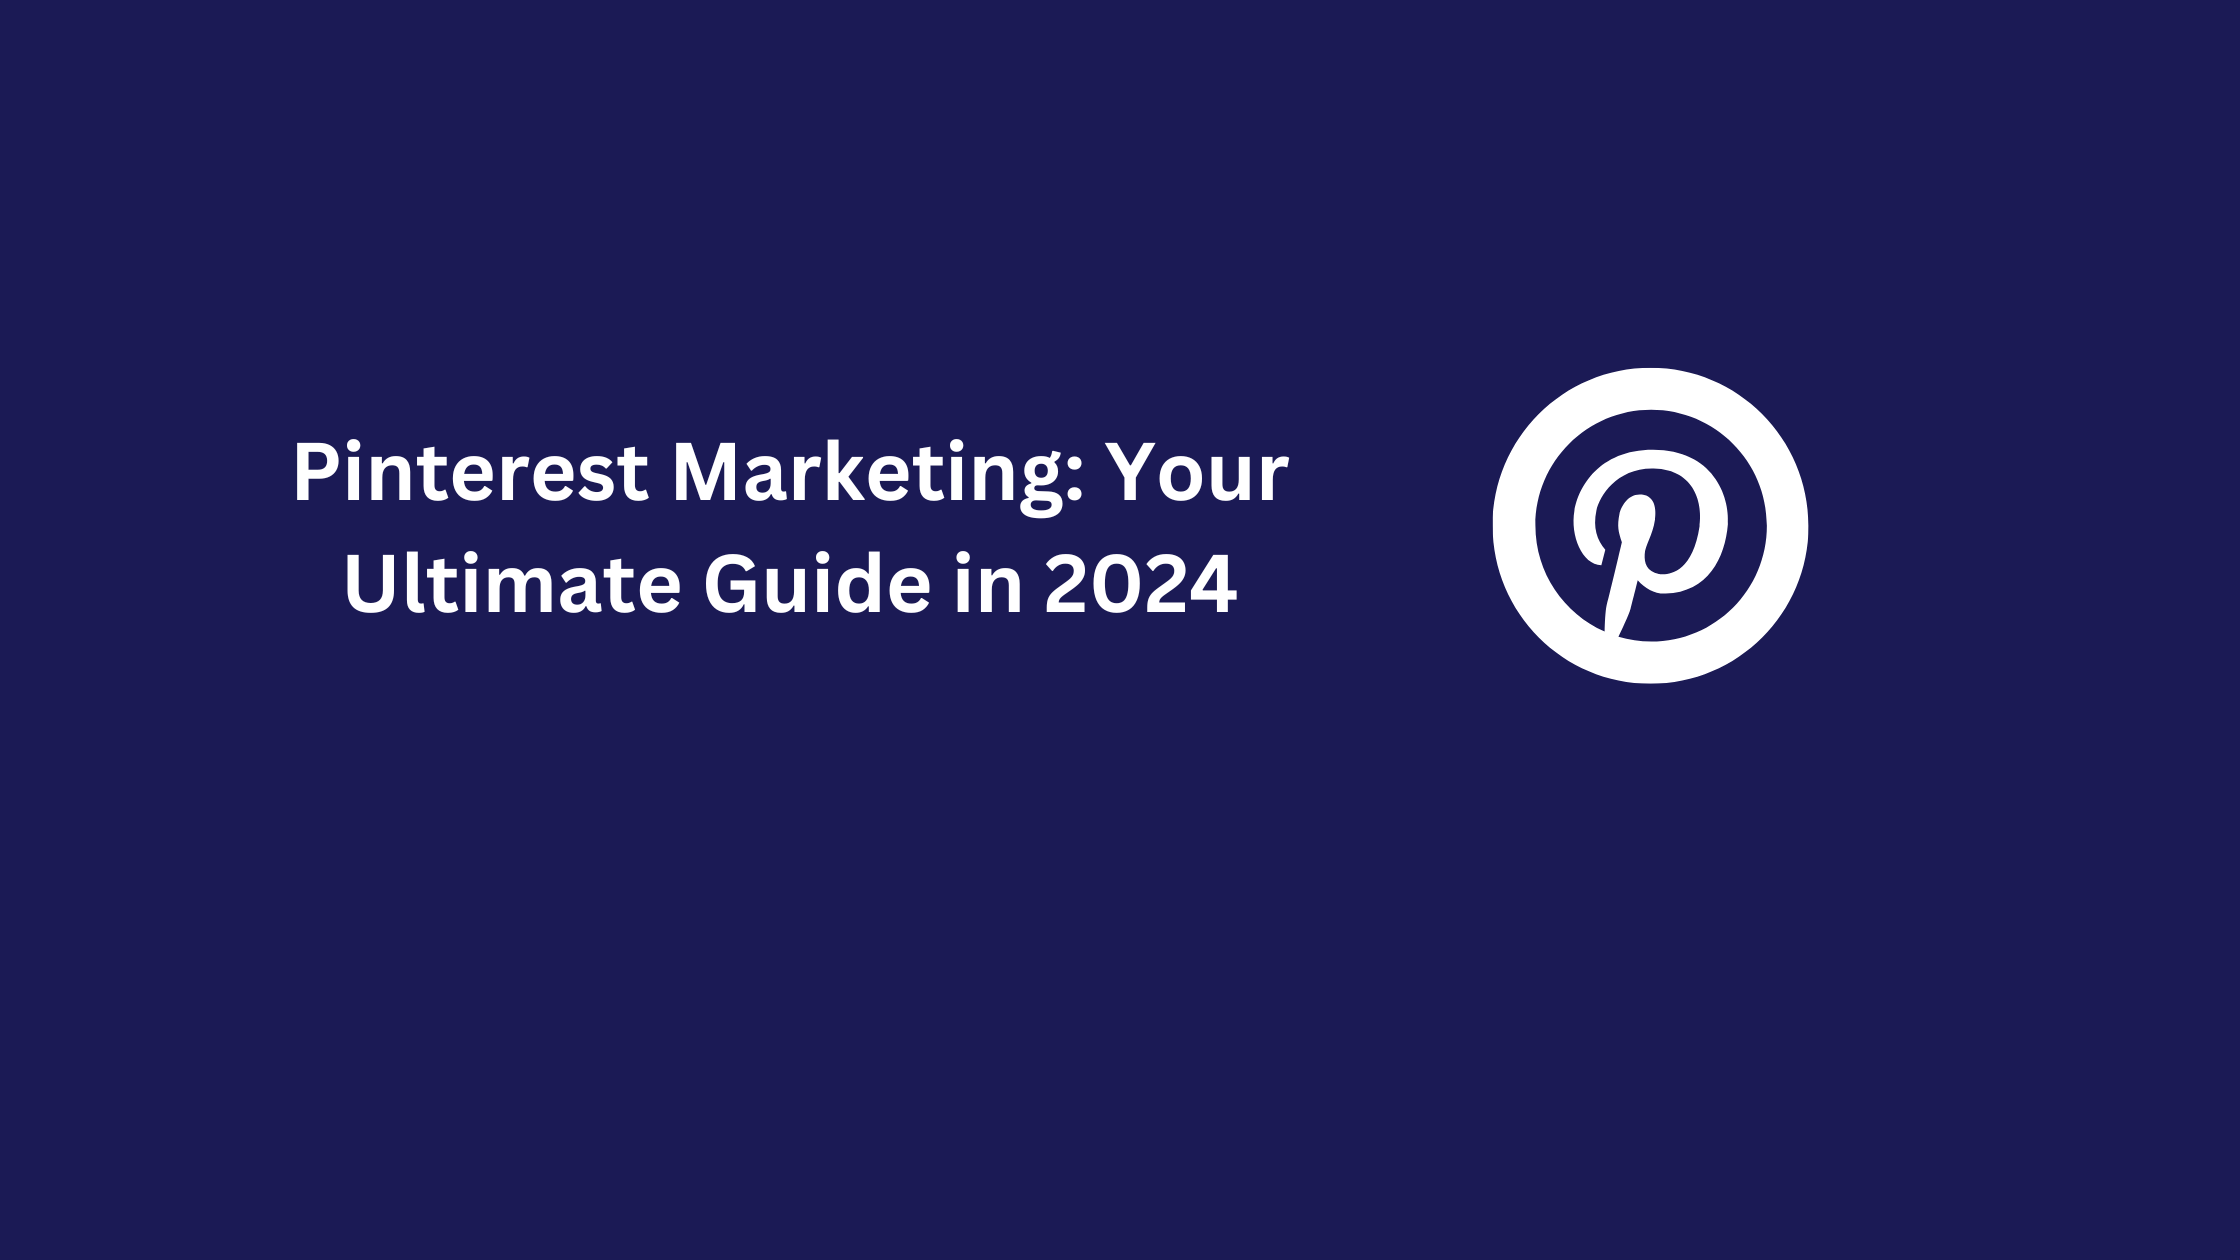 Pinterest Marketing: Your Ultimate Guide in 2024